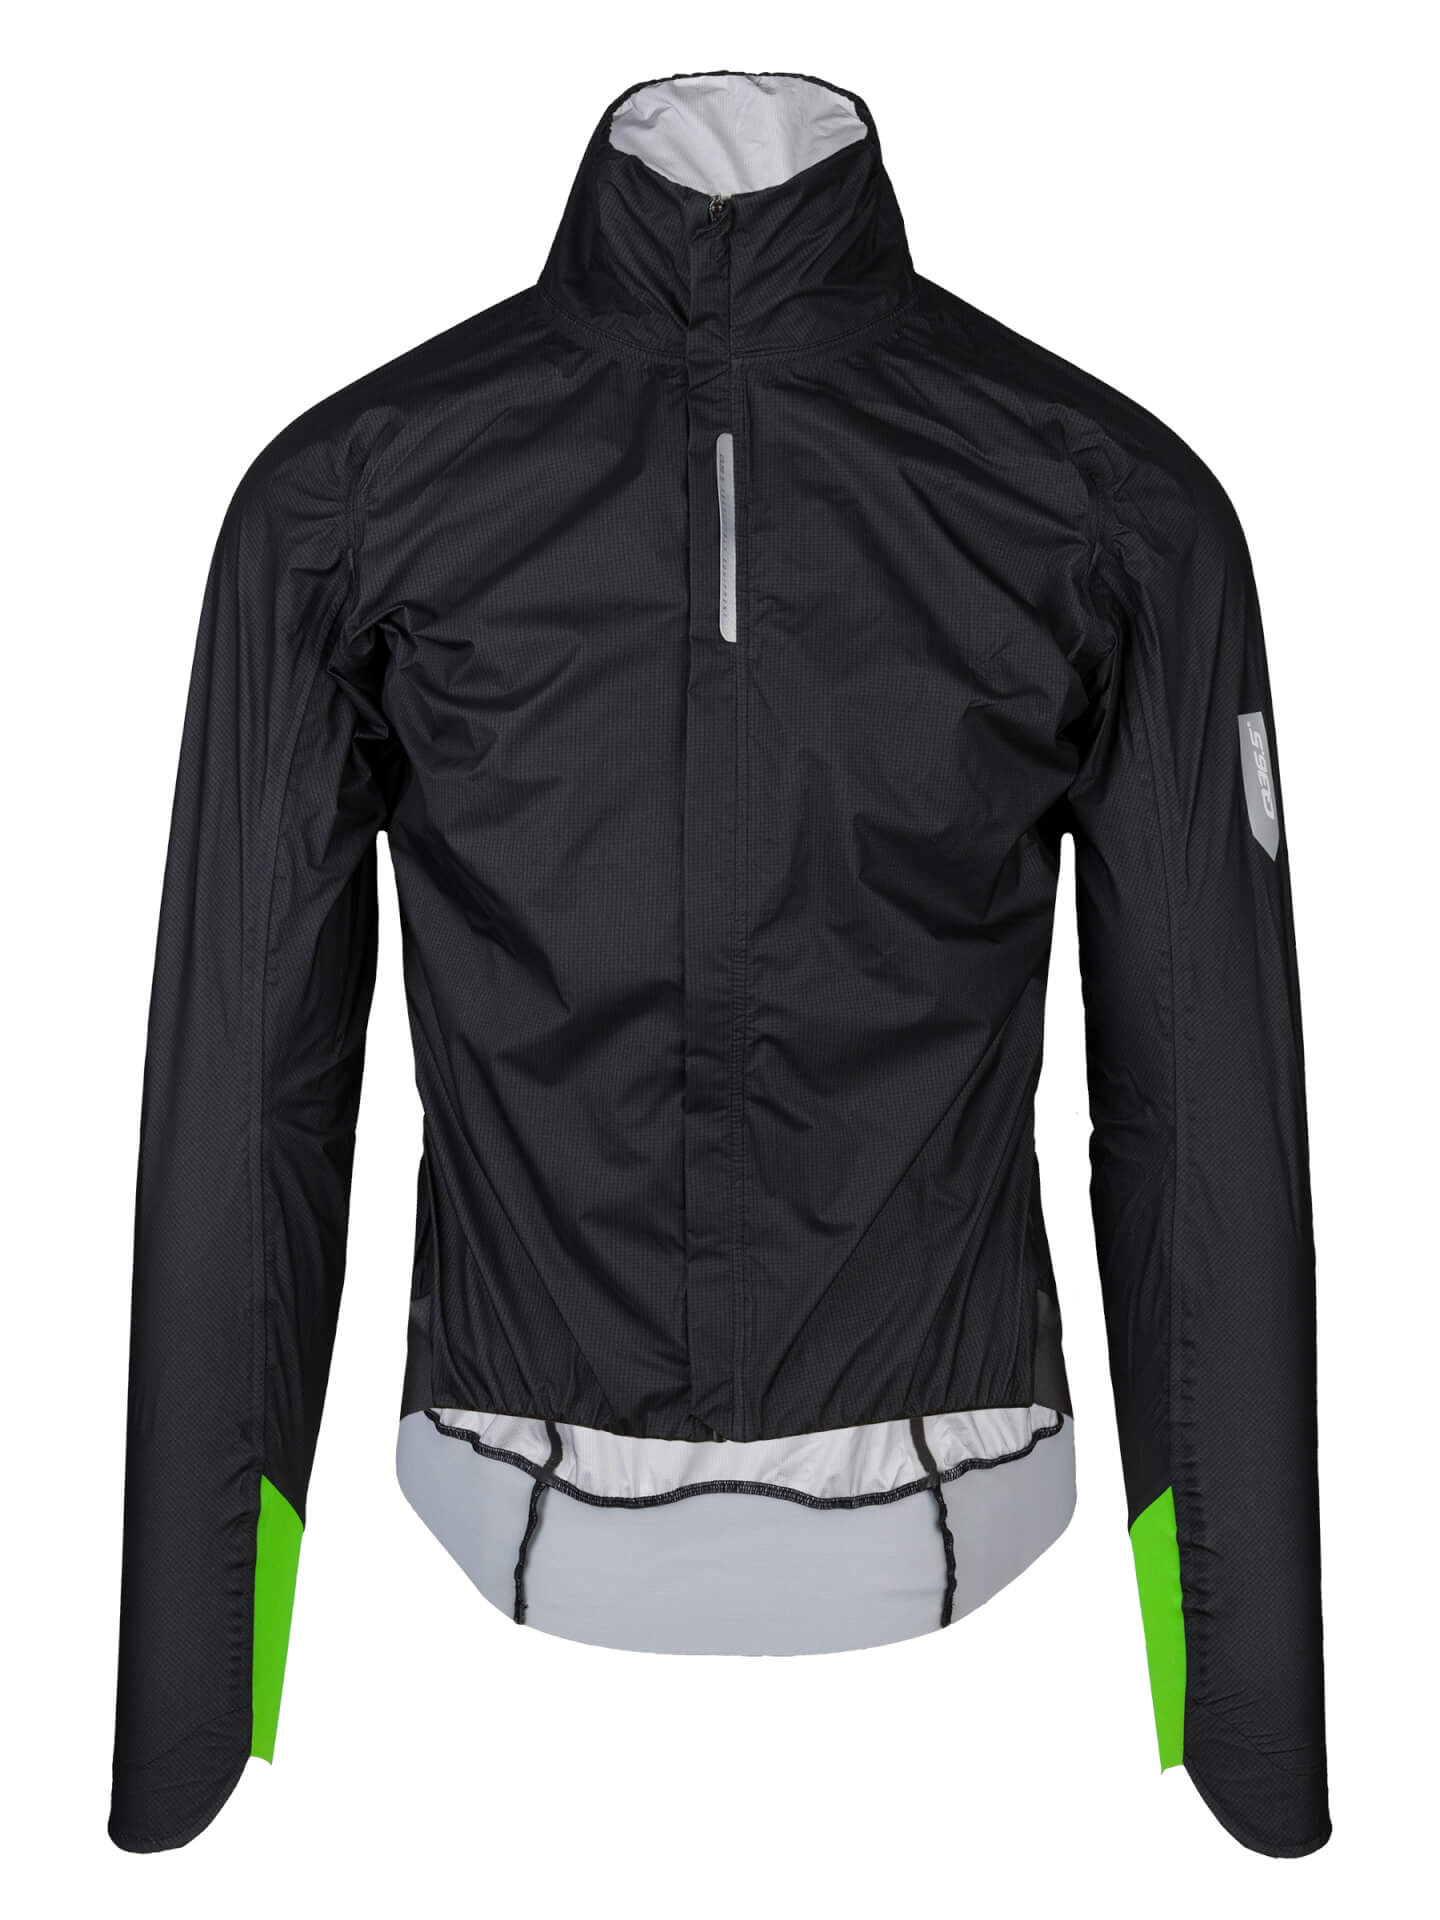 Mens winter cycling clothing and accessories • Q36.5